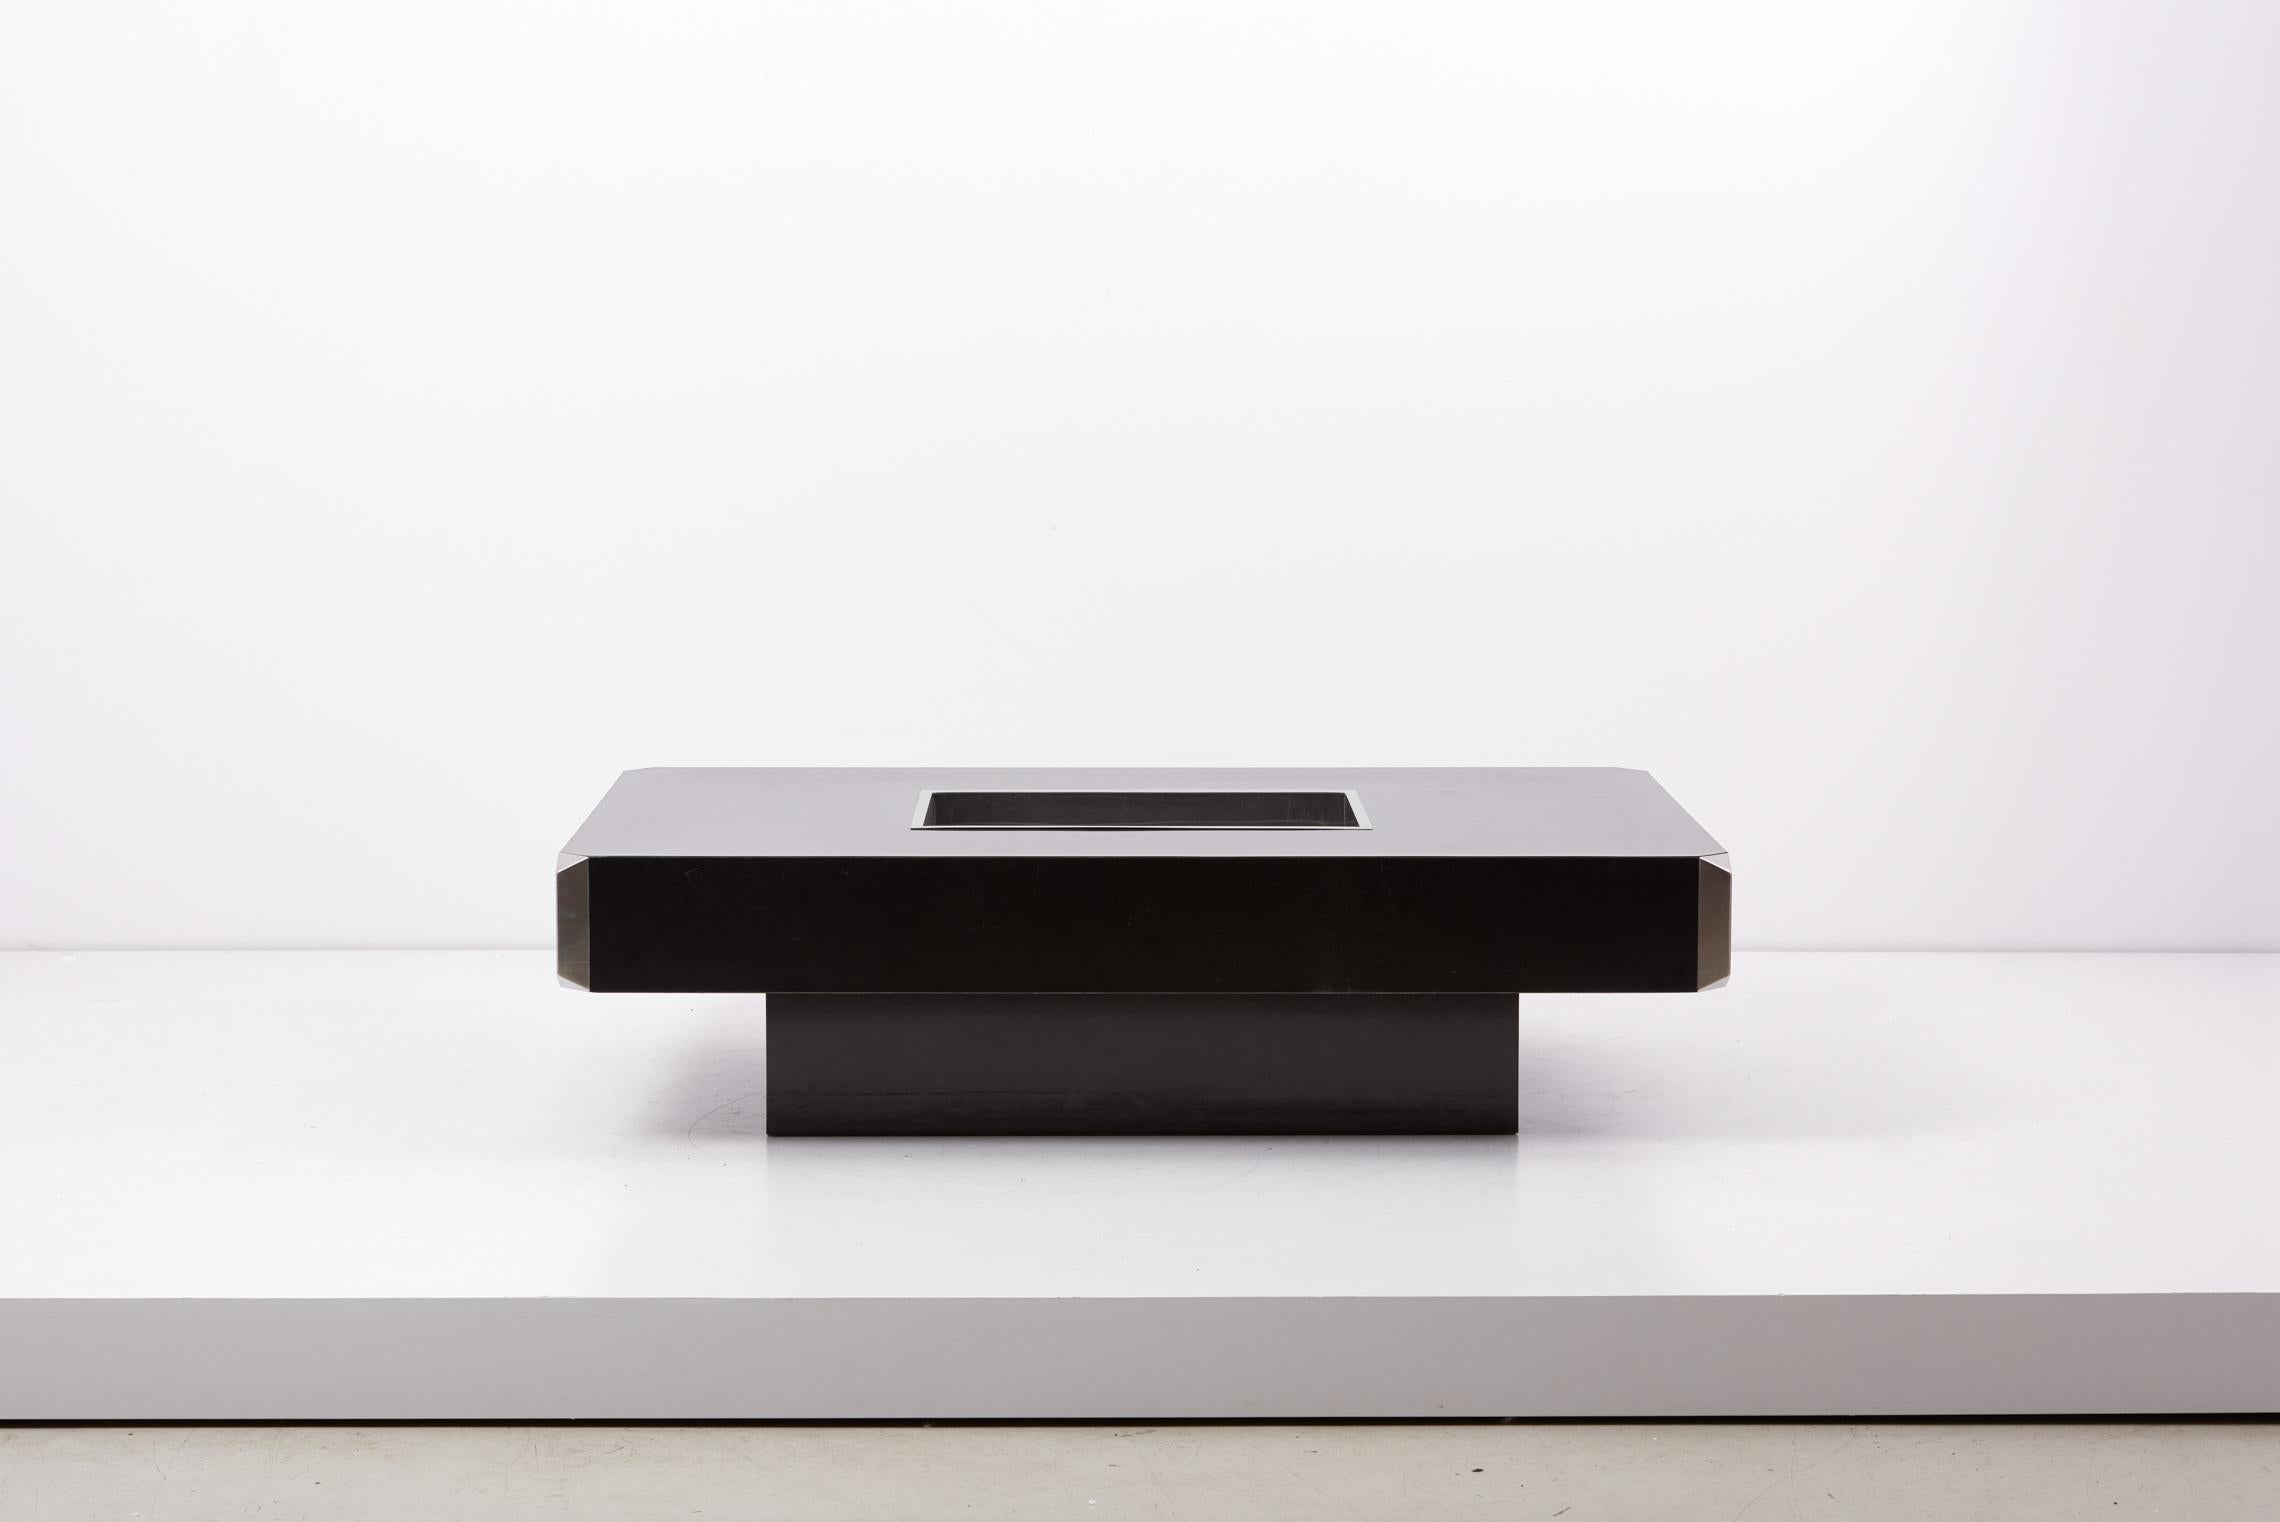 Coffee table, model Alveo designed by Willy Rizzo and made from laminated black formica with chrome tray and corners.